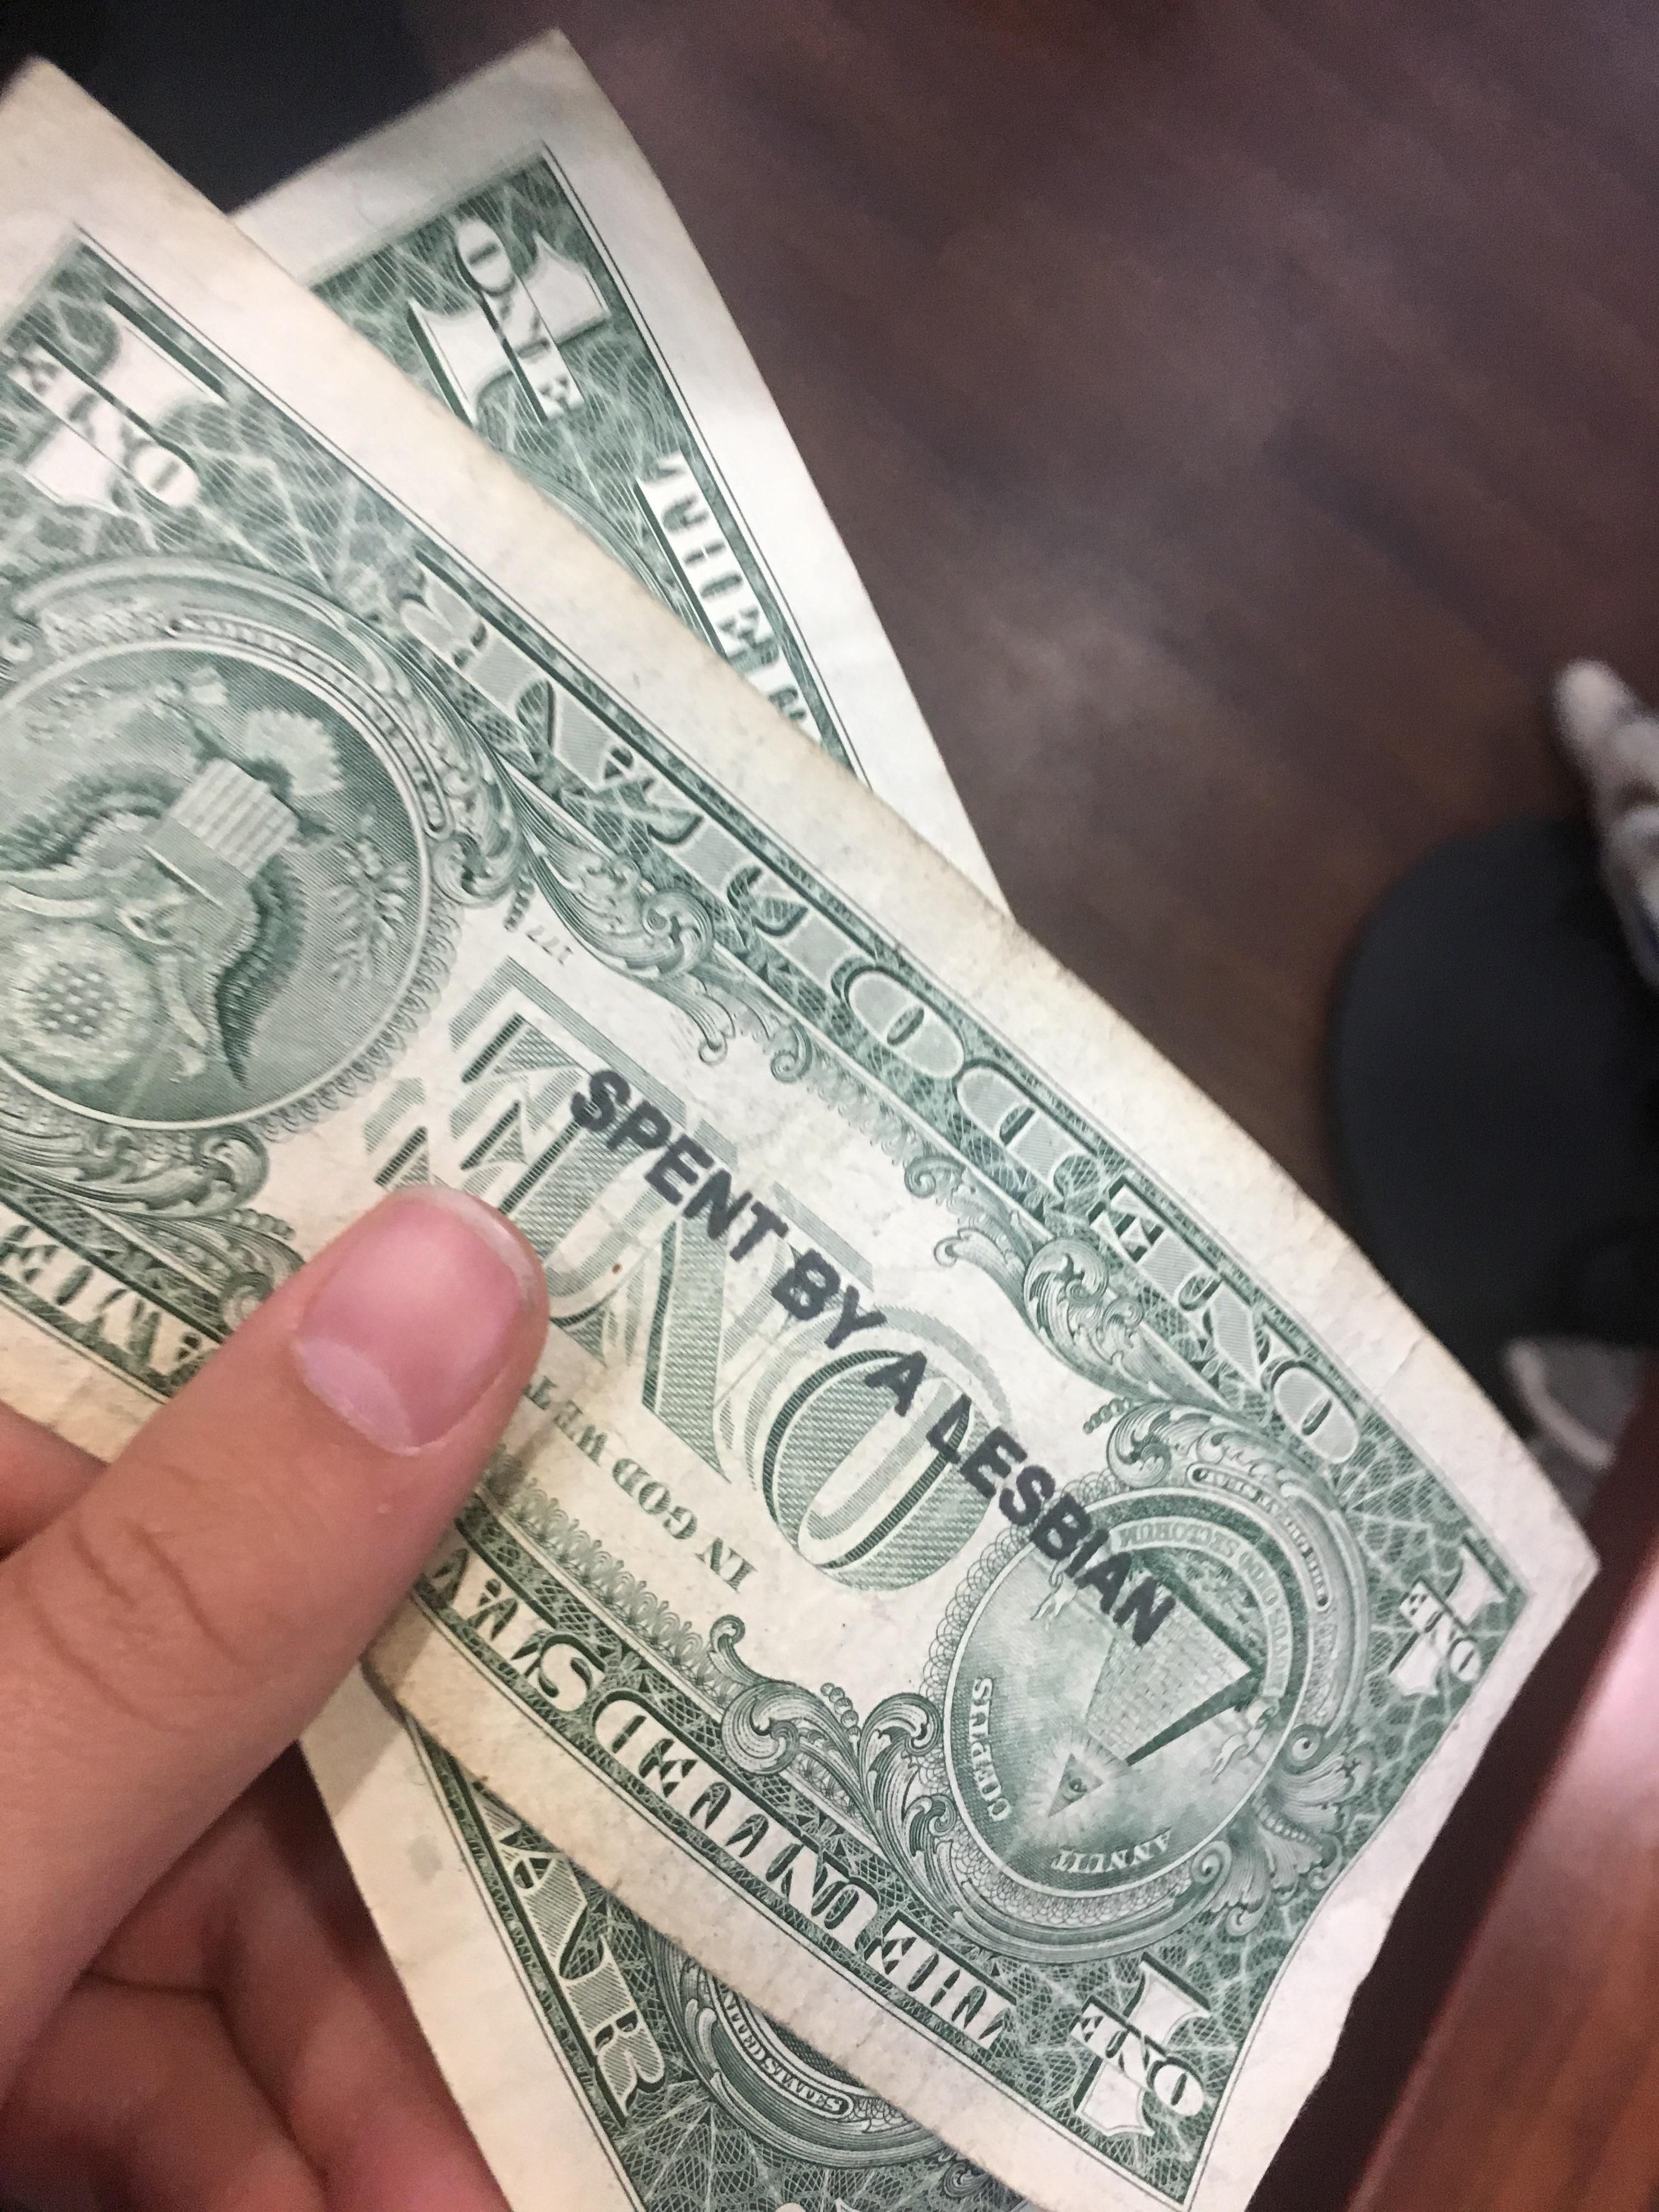 This dollar bill I got as change today